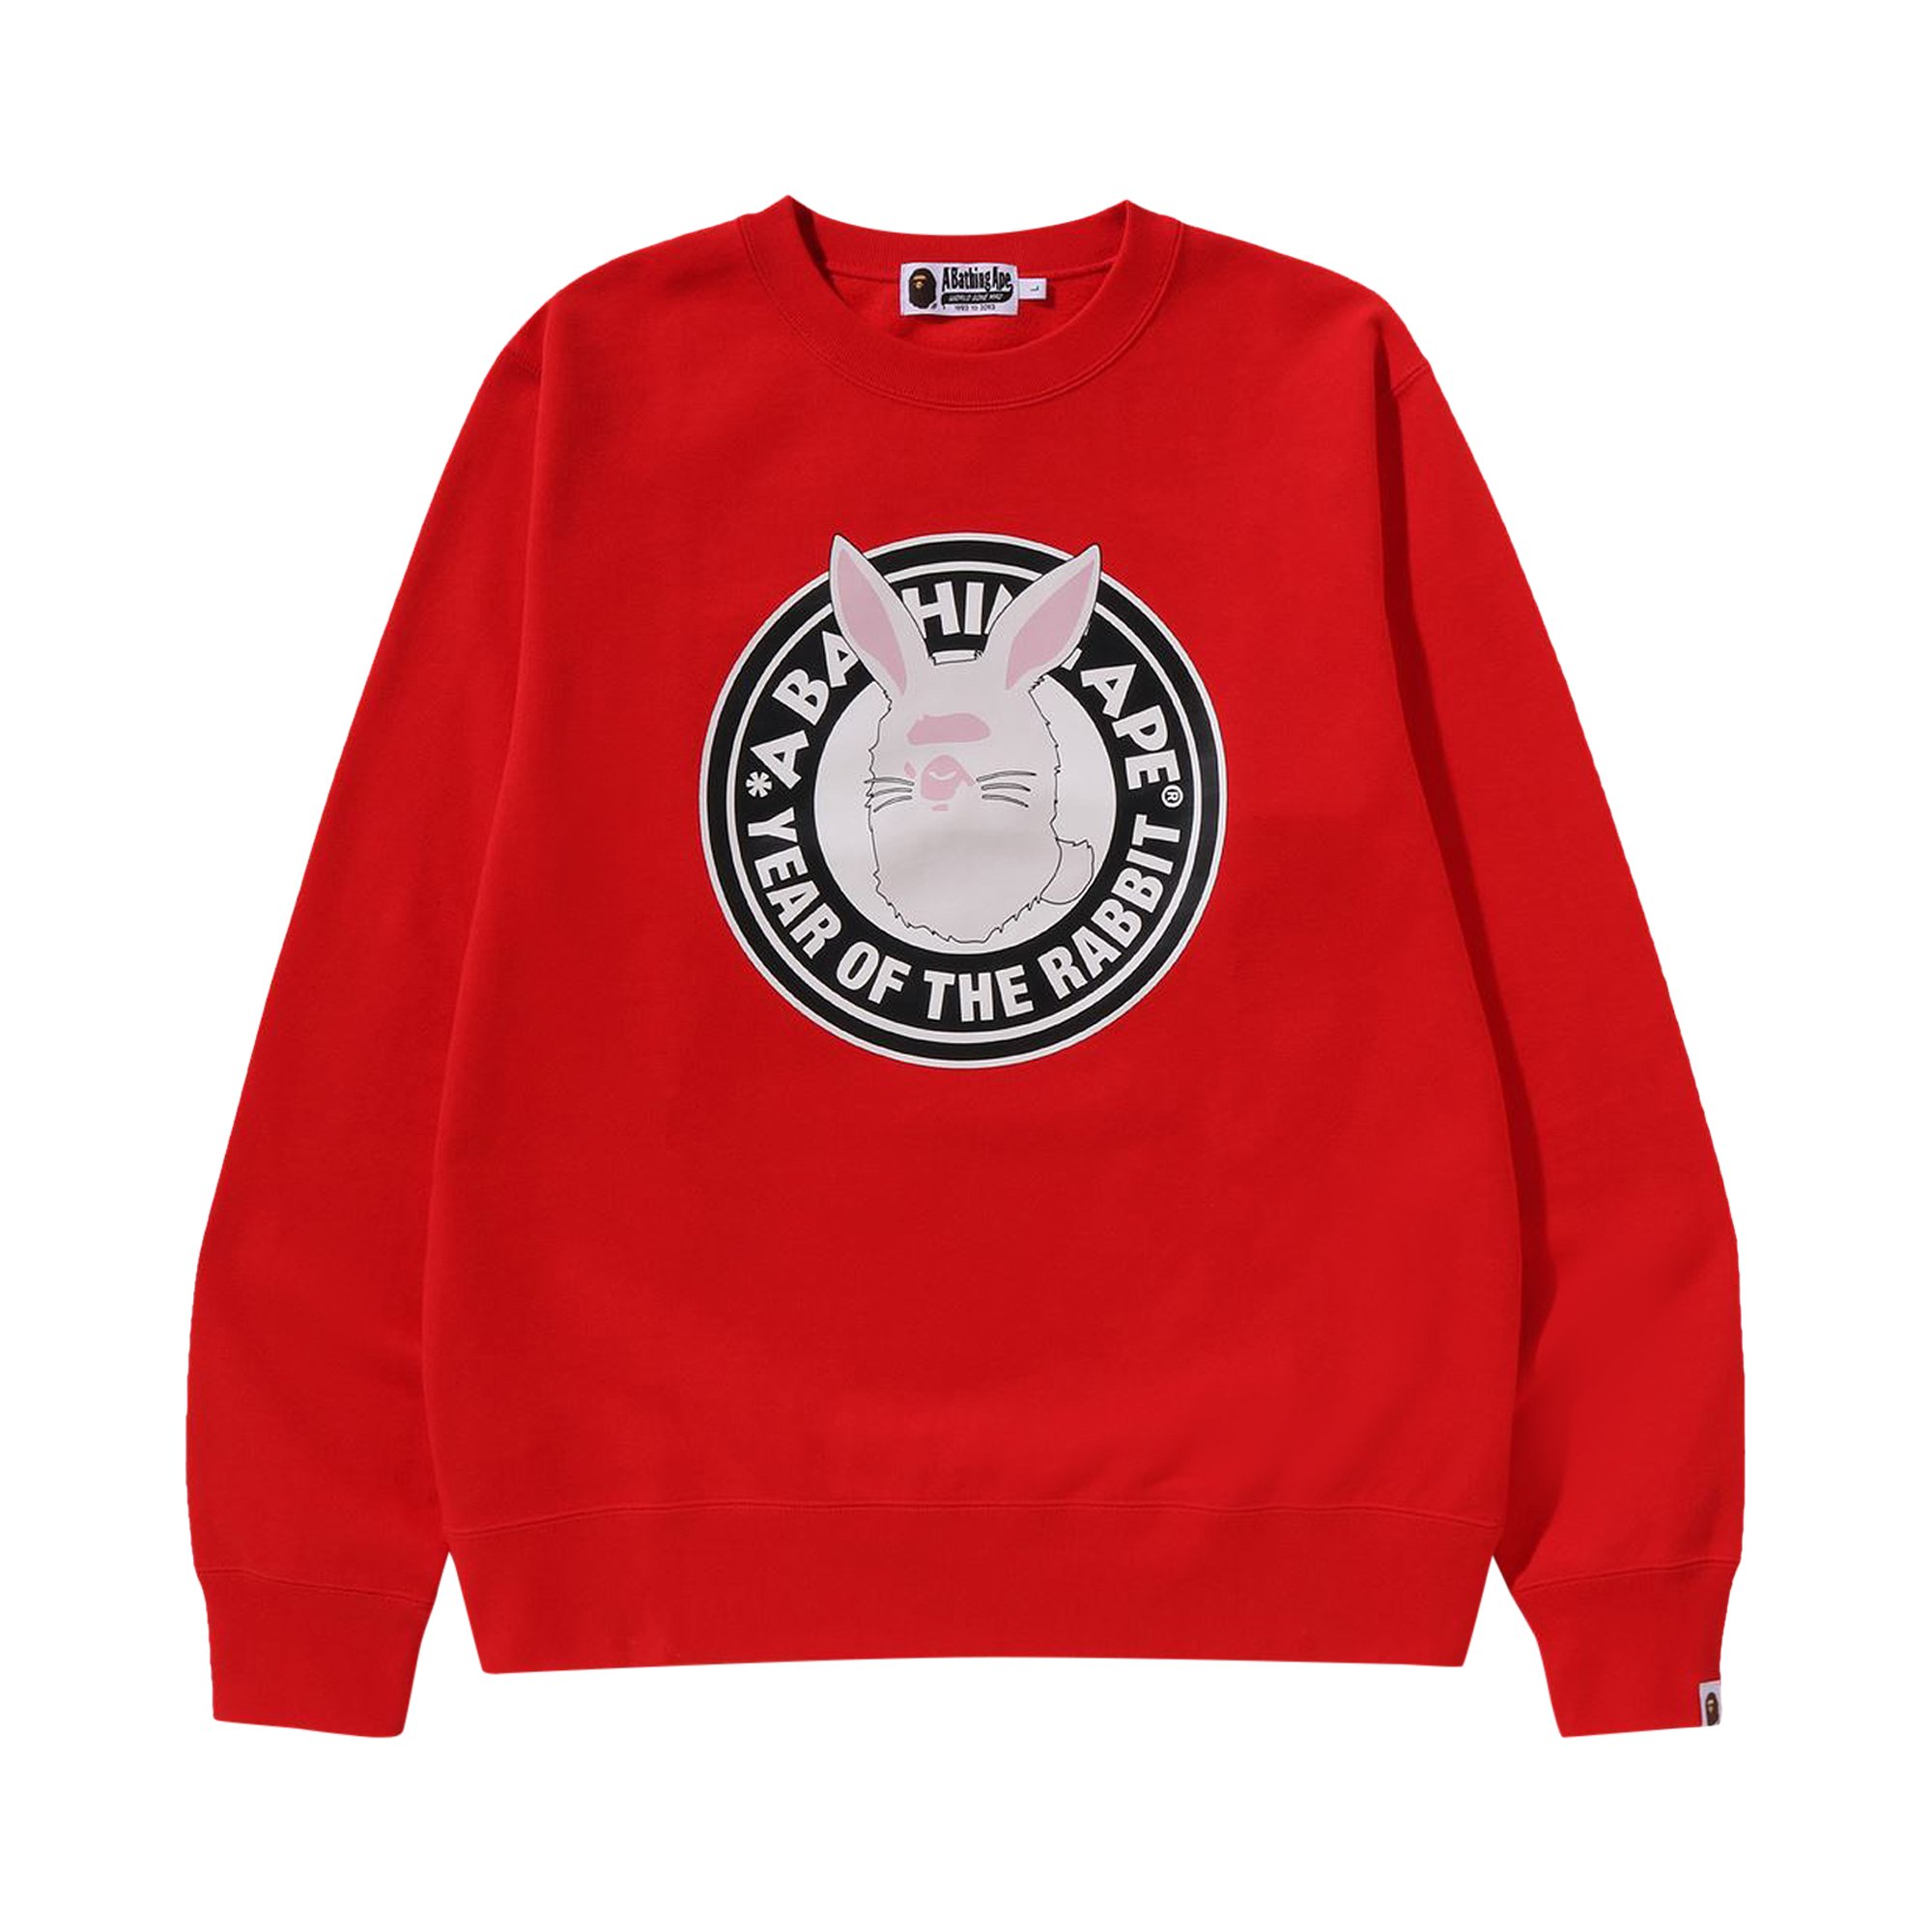 Buy BAPE Year Of The Rabbit Crewneck M 'Red' - 1J20 113 001 RED